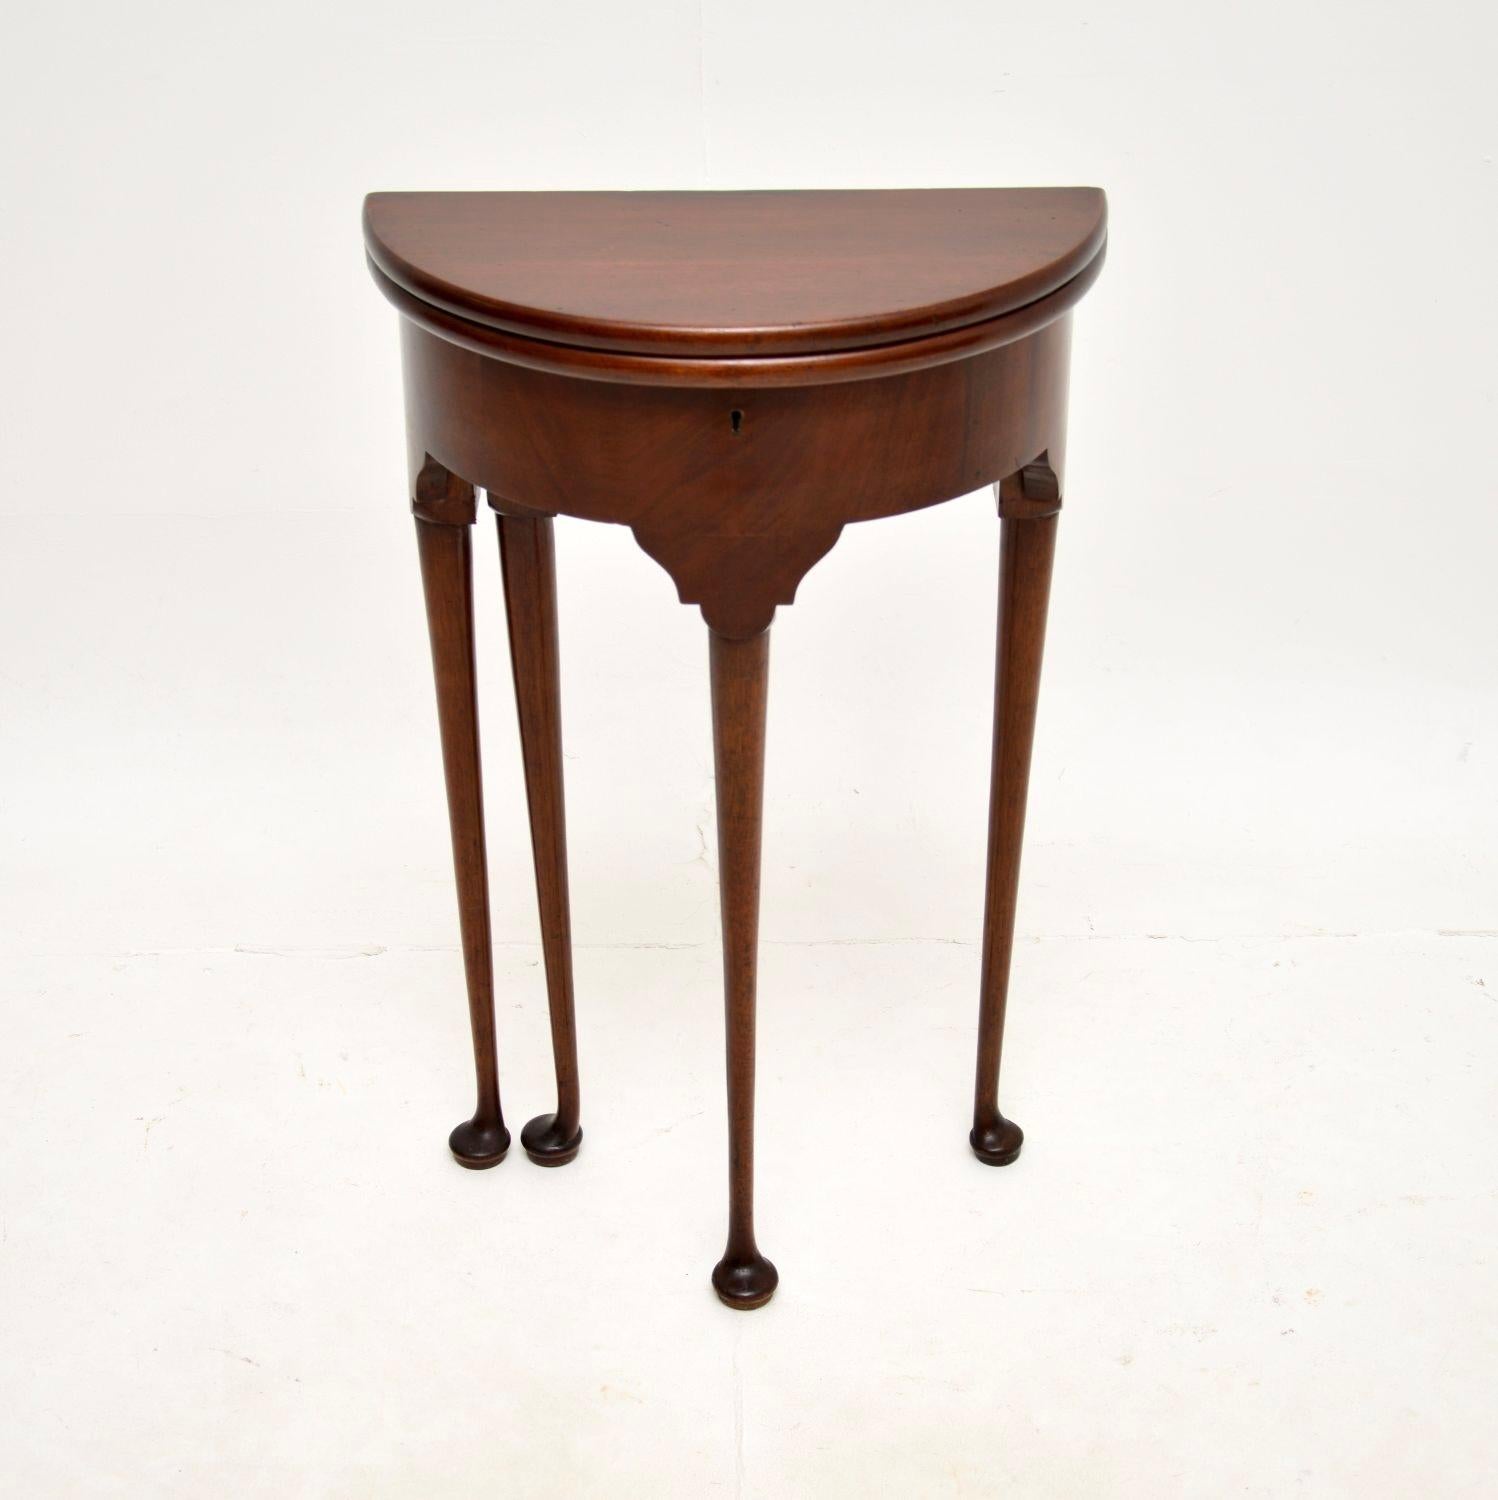 A charming original antique Georgian demi lune side table. This was made in England, we would date this around the 1780-1800 period.

It is a lovely size, quite small and compact, sitting on slender yet sturdy cabriole legs. There is a hinged gate